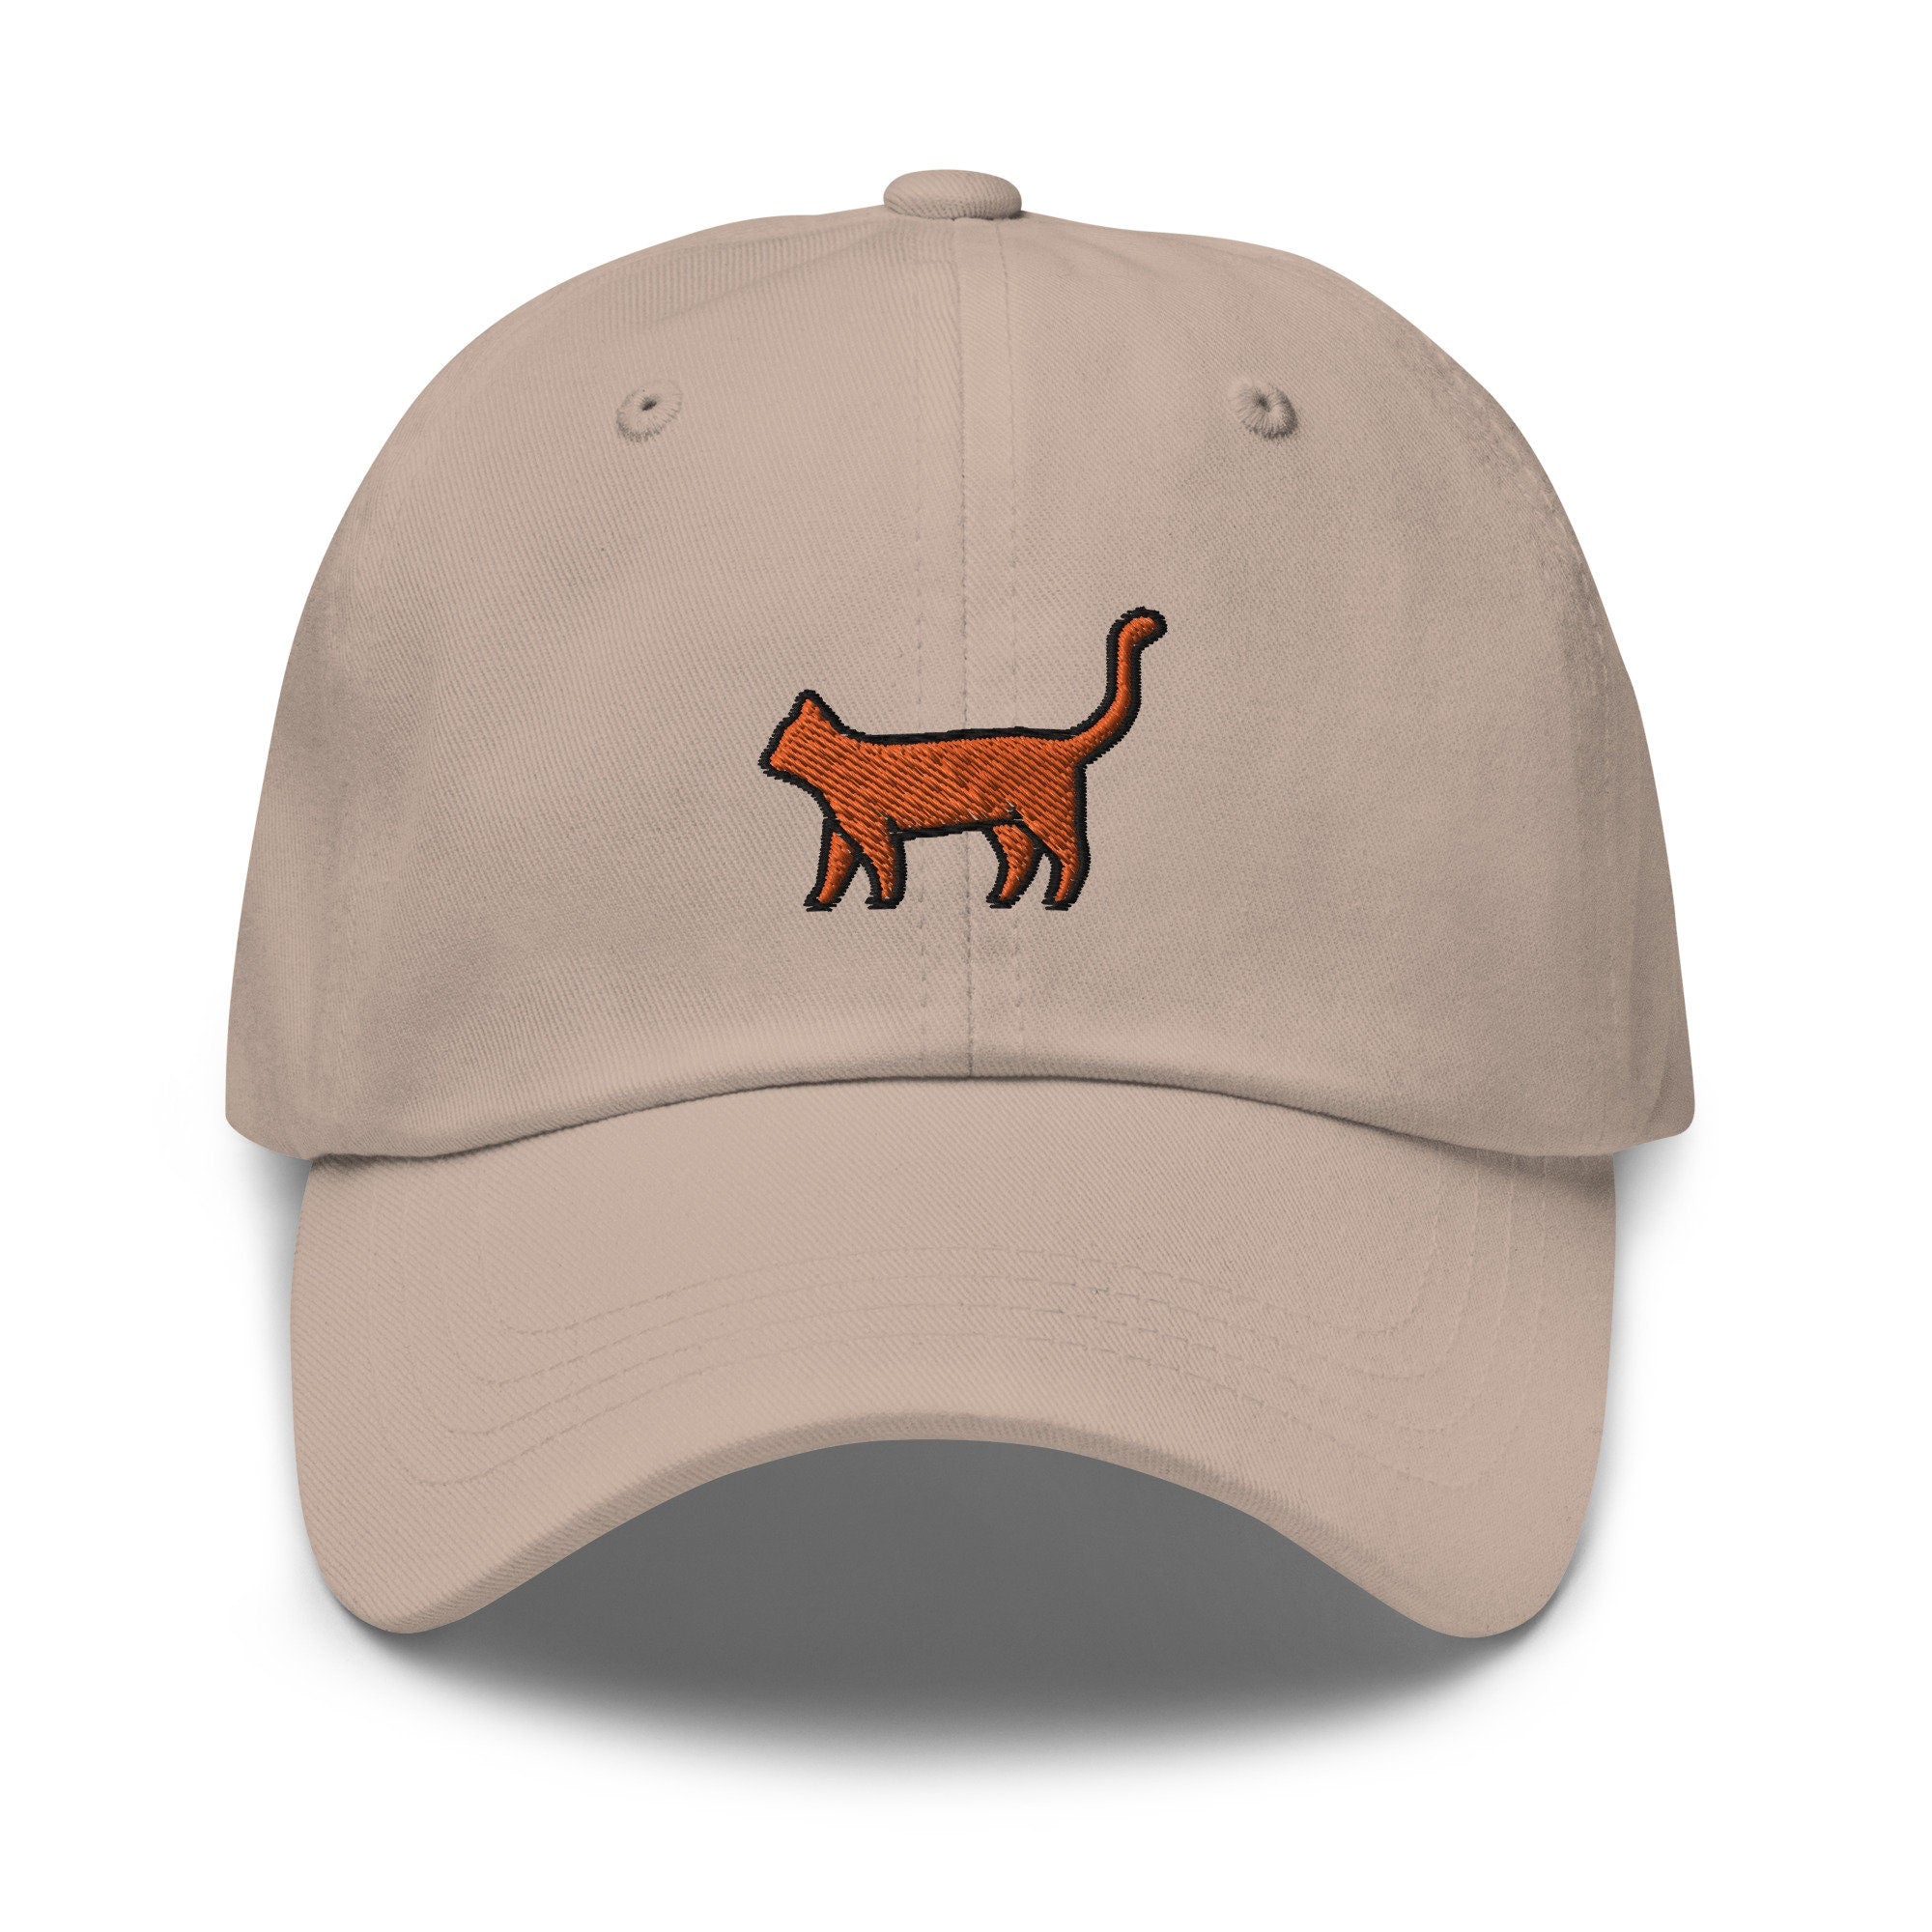 Orange Tabby Cat Embroidered Dad Hat